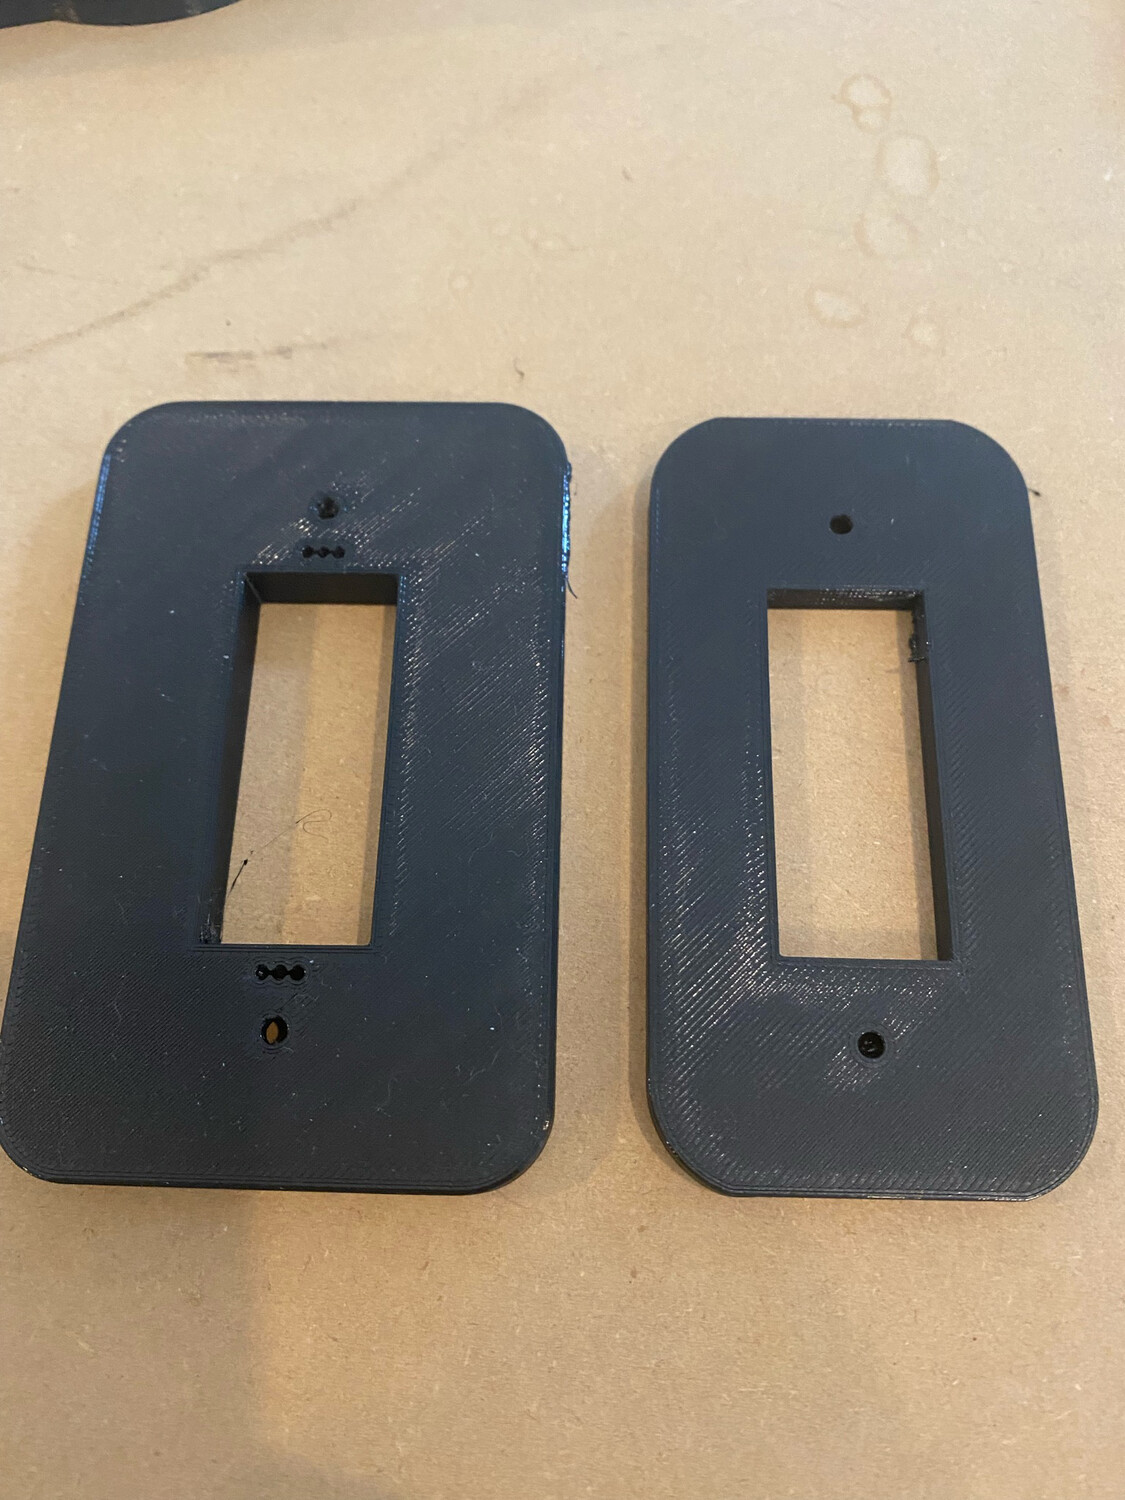 Backplate for use with Swivel Mounts